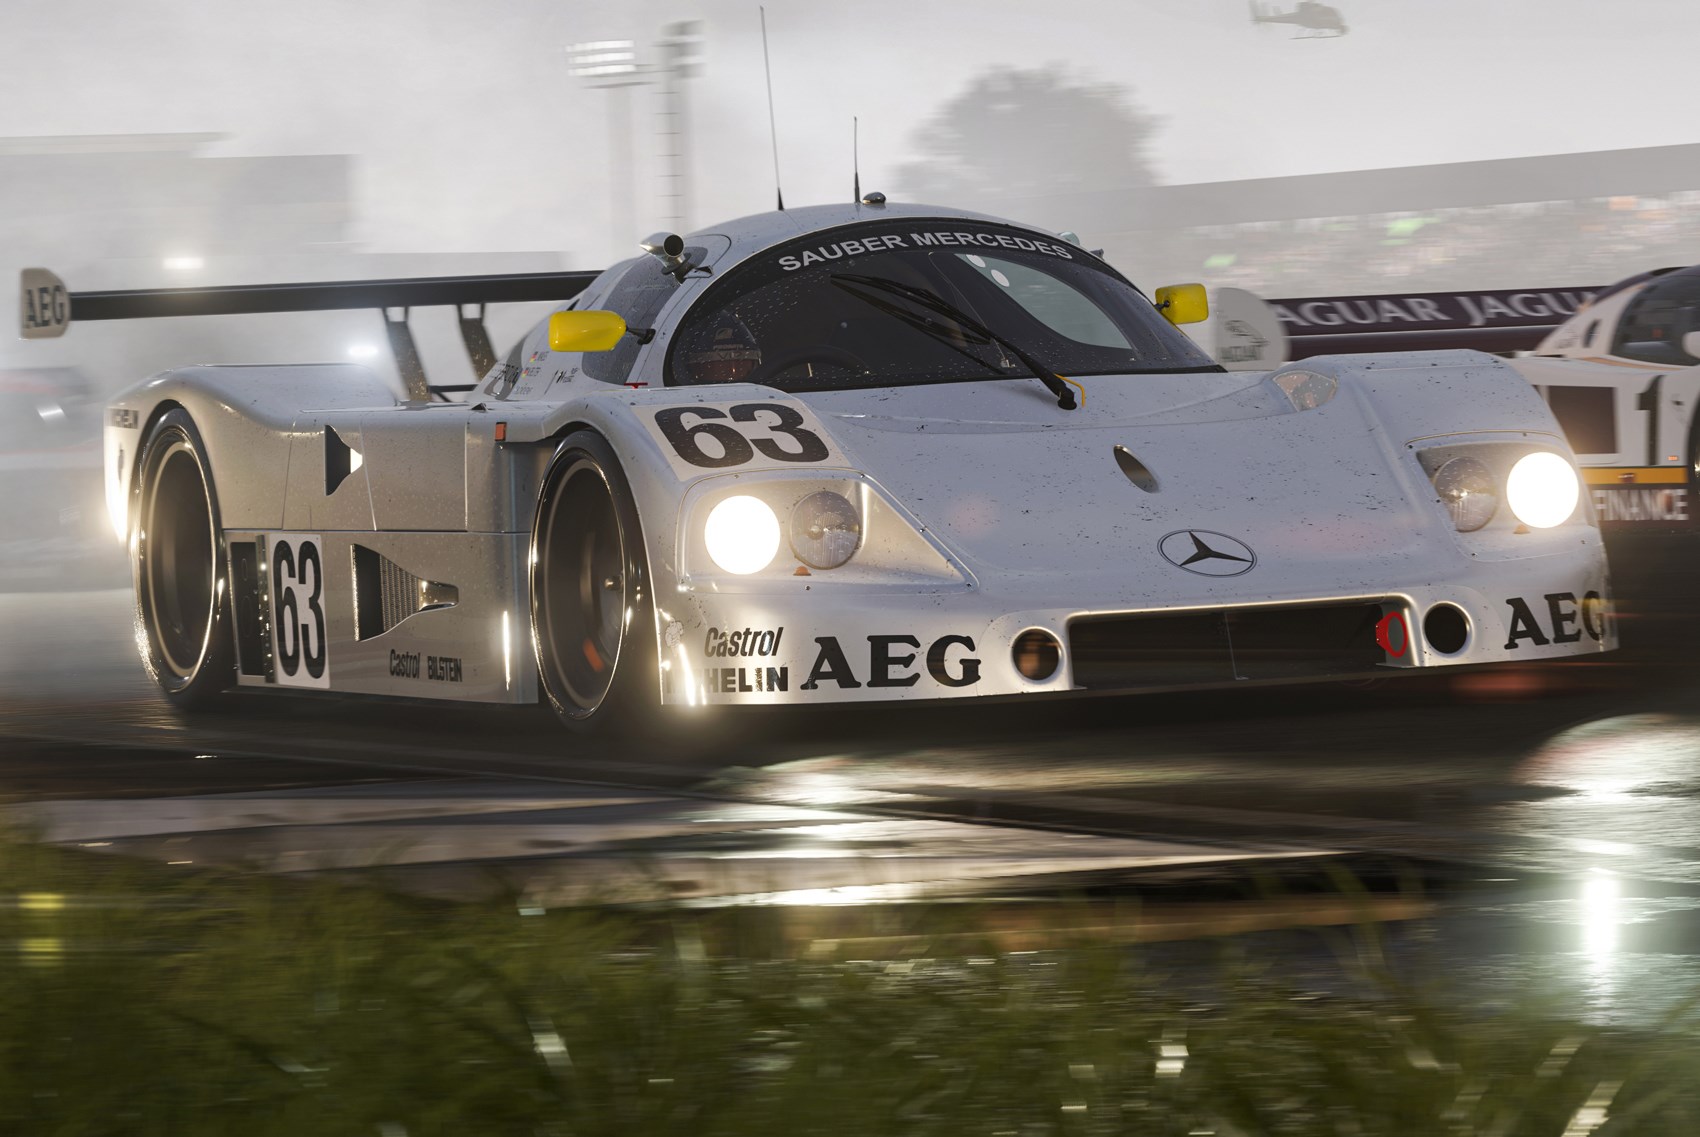 Review: Forza Motorsport